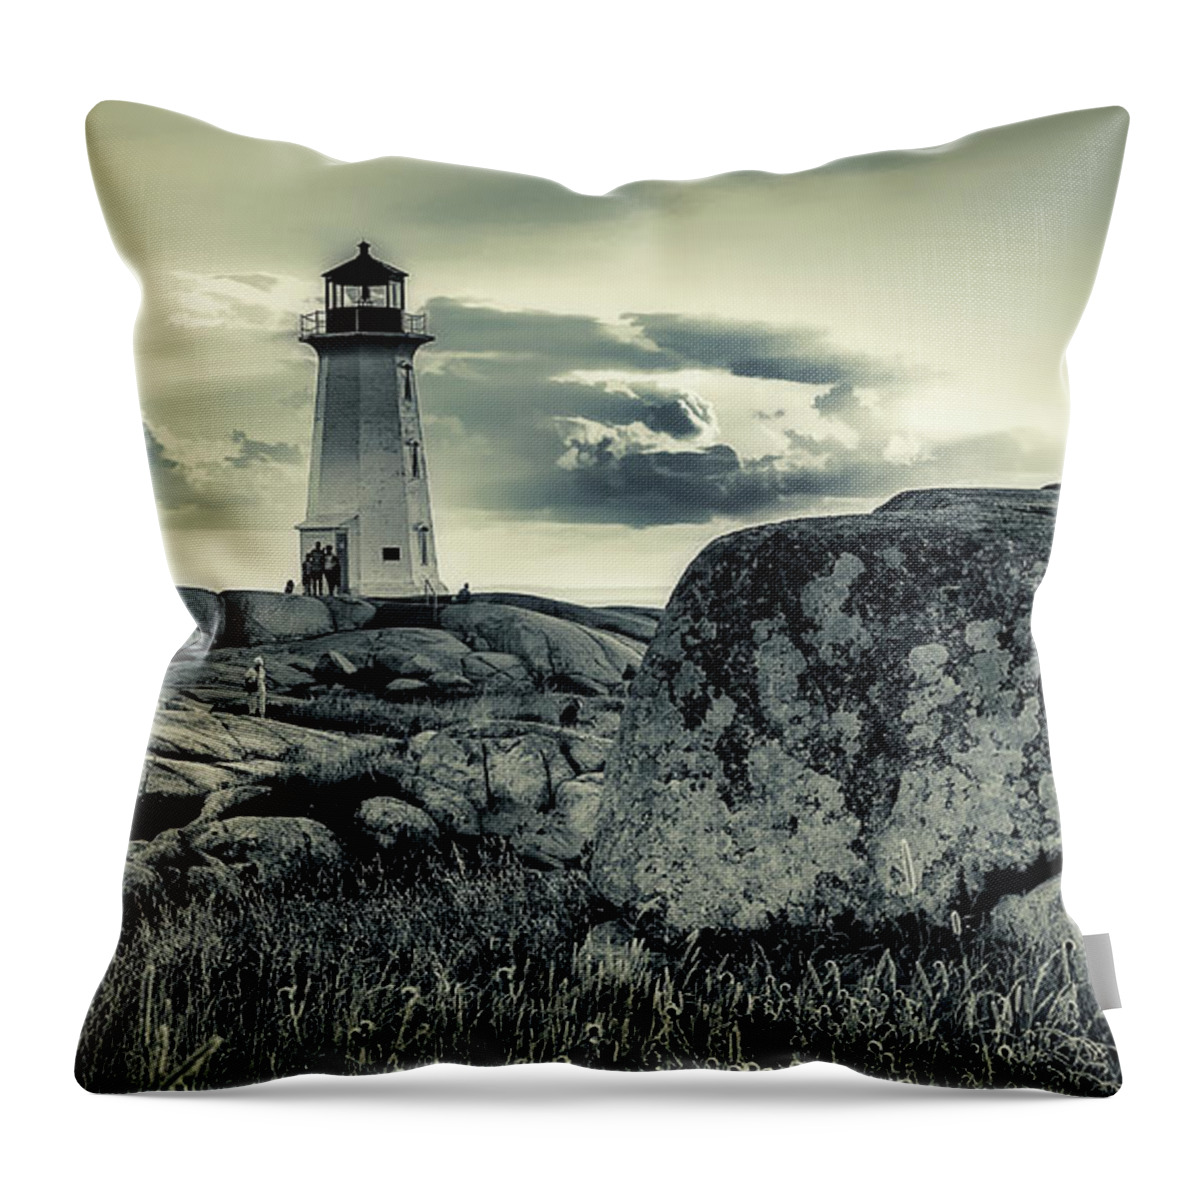 2016 Throw Pillow featuring the photograph Peggys Cove Lighthouse by Ken Morris